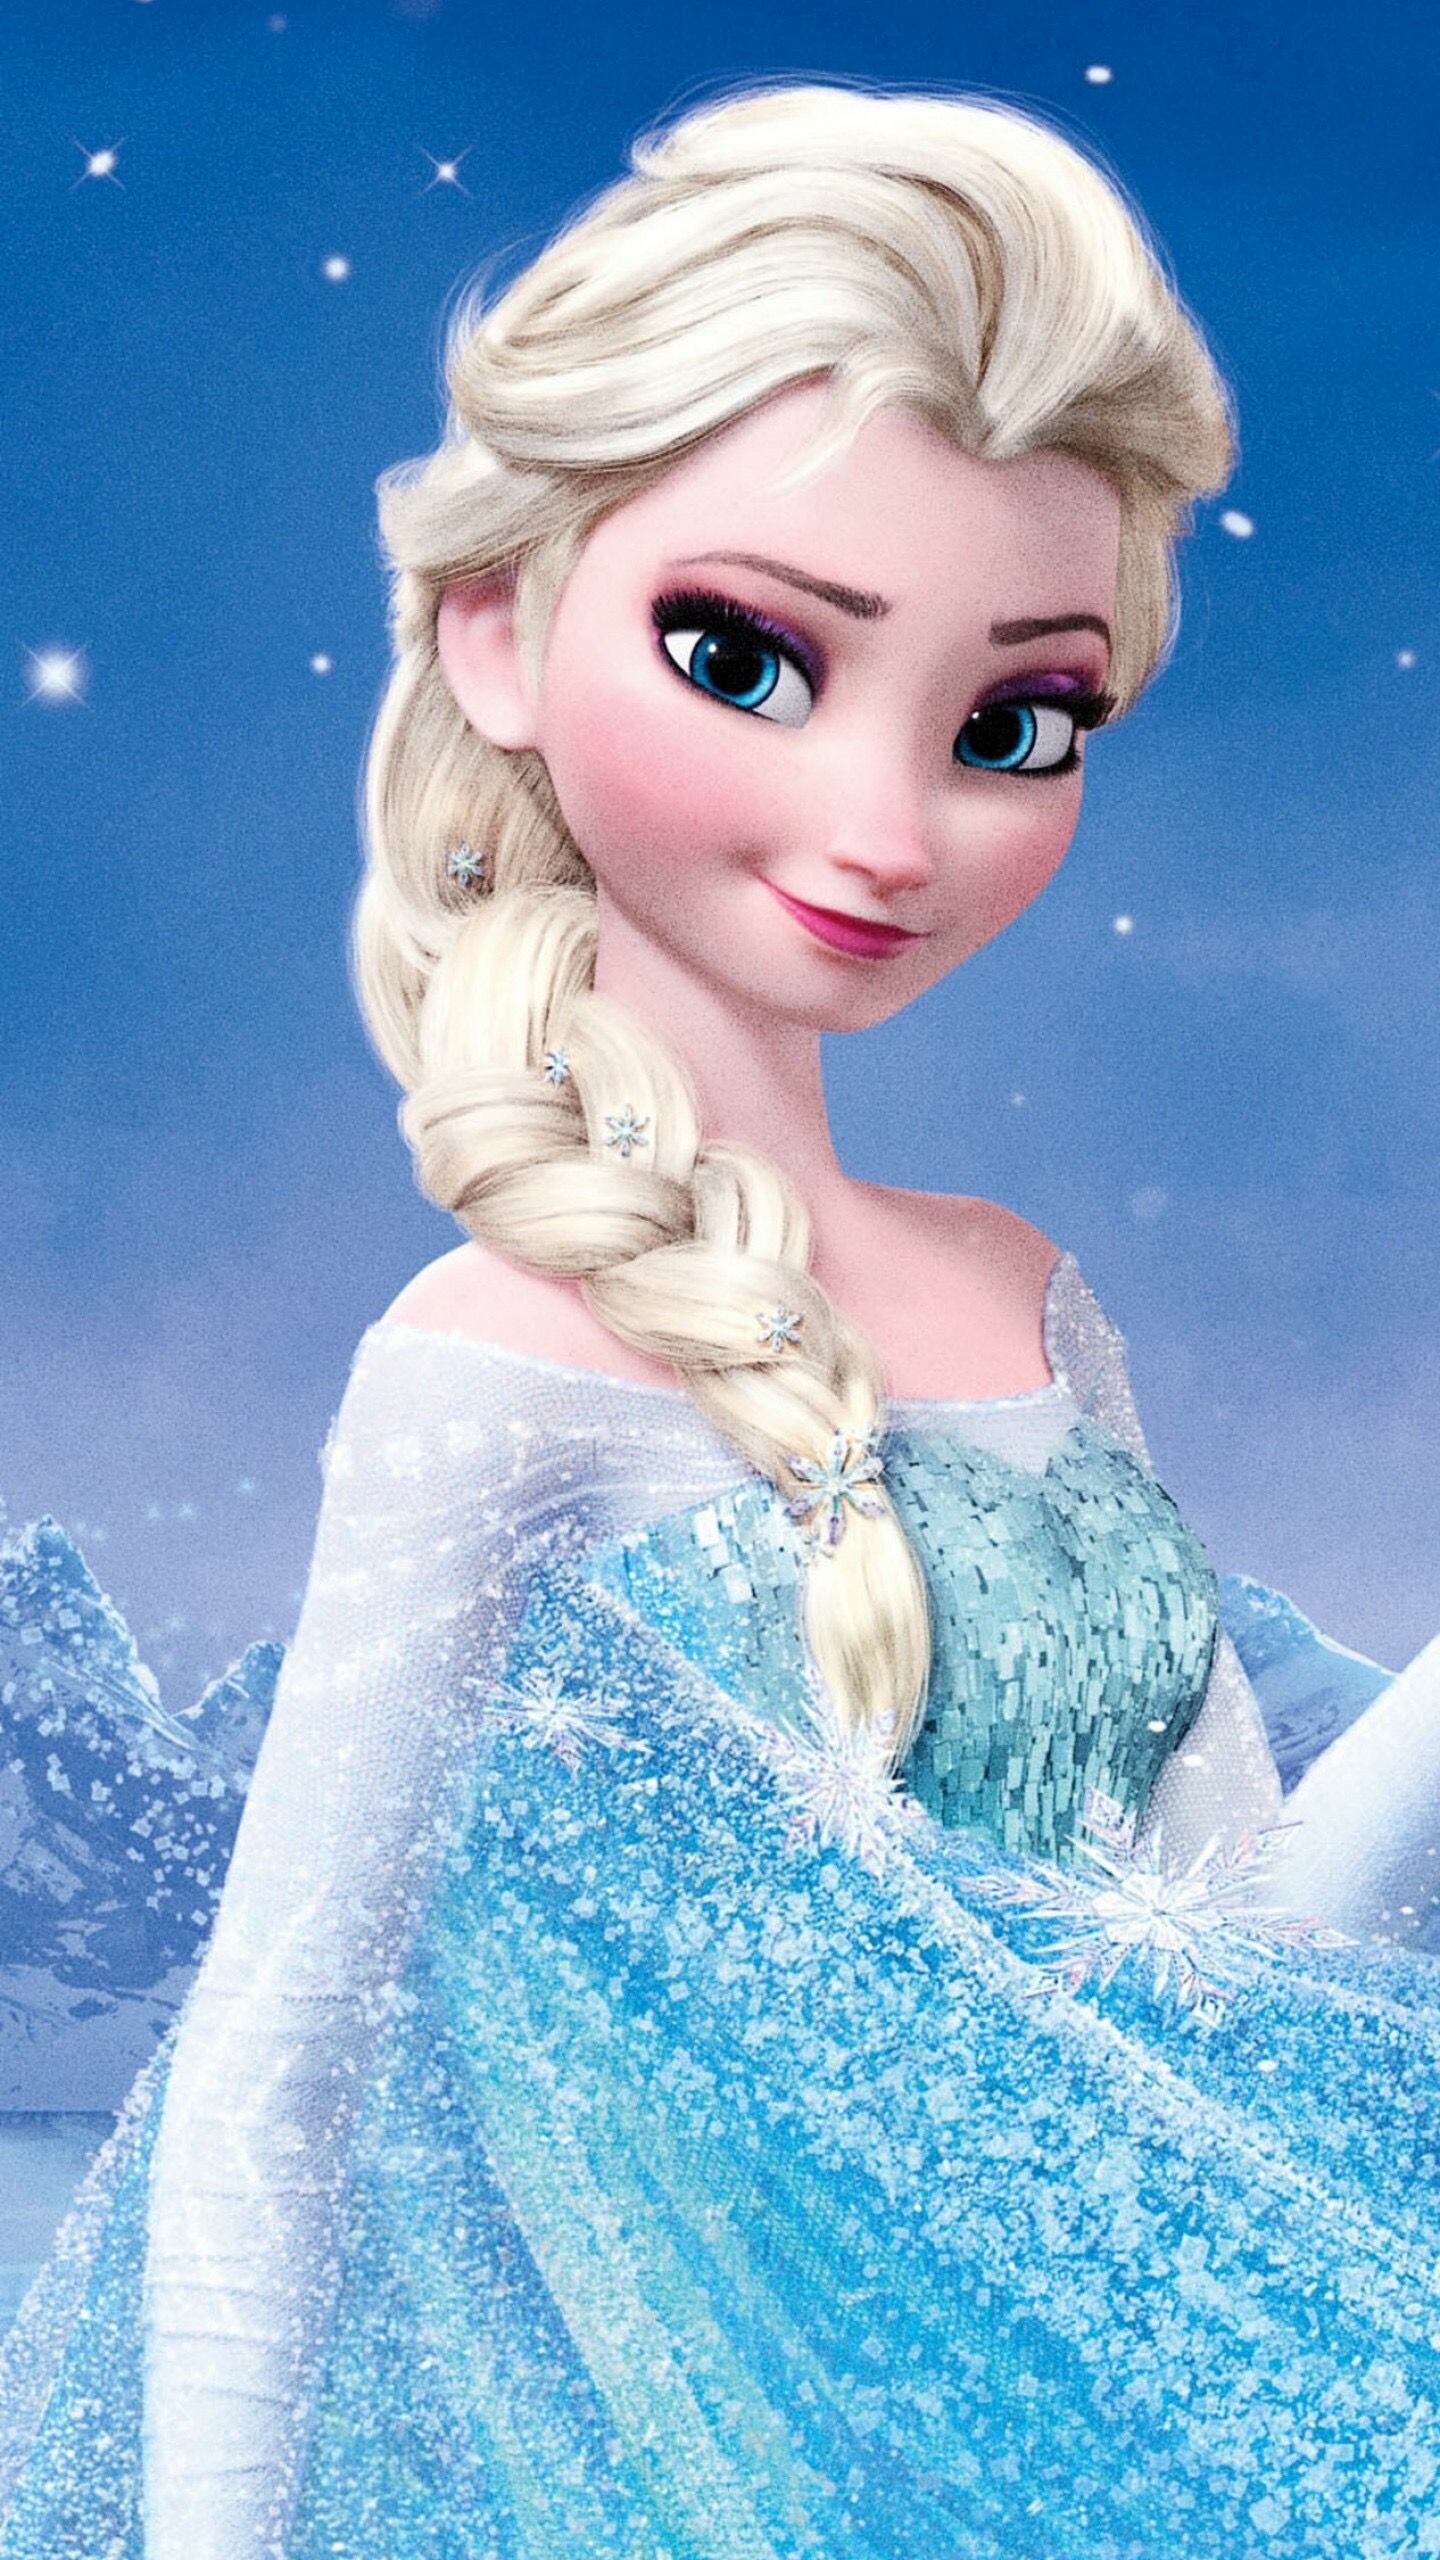 Frozen: Elsa has the magical ability to create and manipulate ice and snow. 1440x2560 HD Wallpaper.